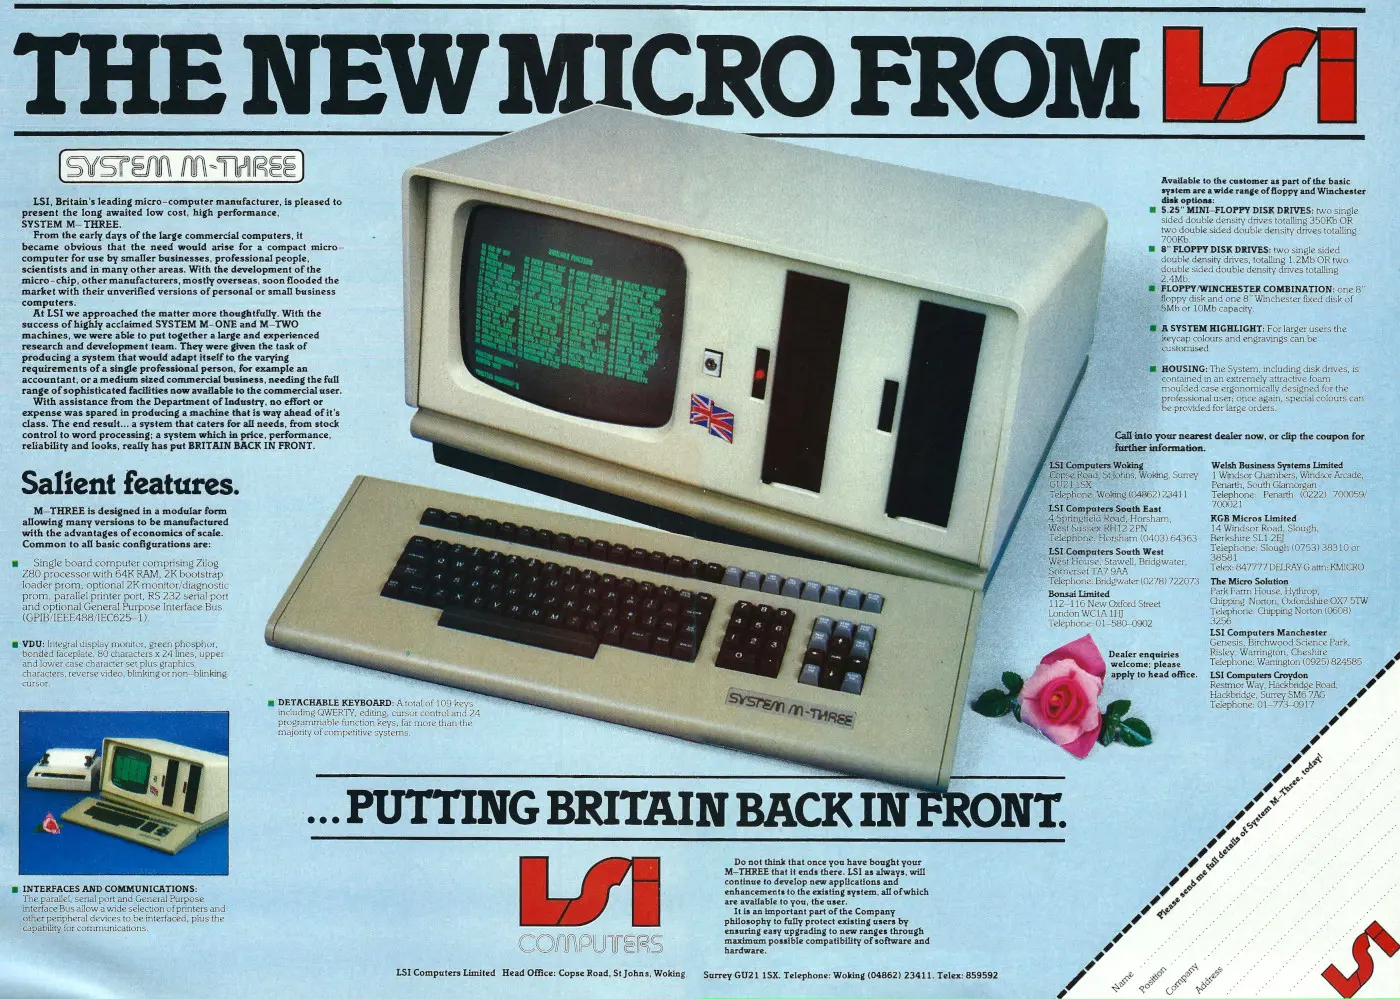 LSI Advert: The new micro from LSI - Putting Britain back in front, from Personal Computer World, February 1982